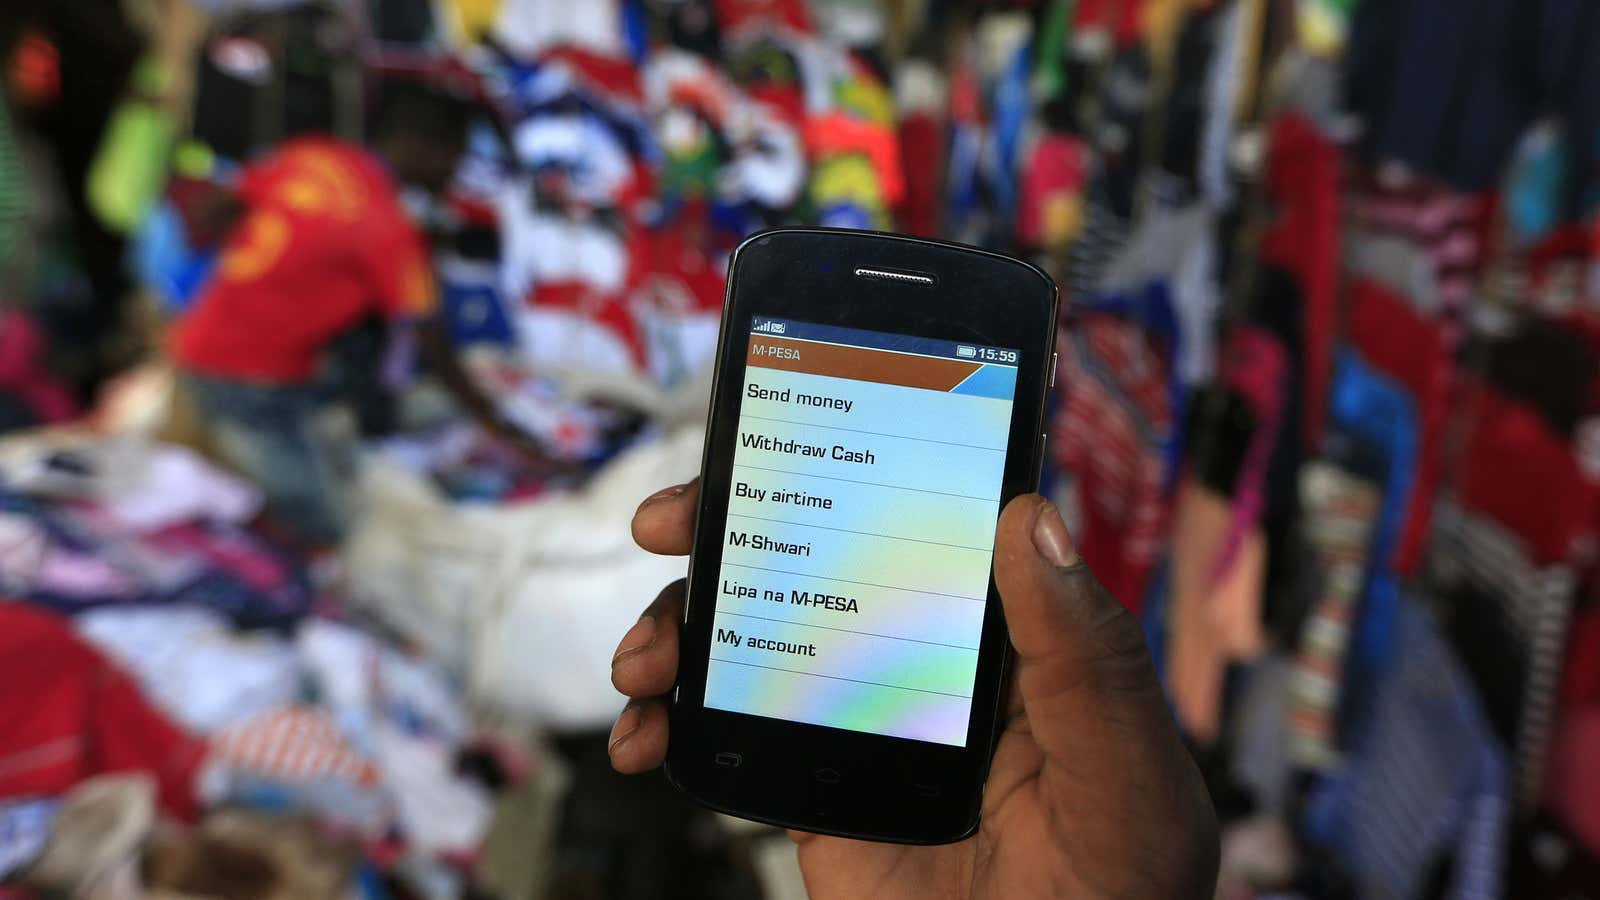 There is increasing demand in Africa for super apps which conveniently combine pay, commerce, mobility and communications applications on one platform.